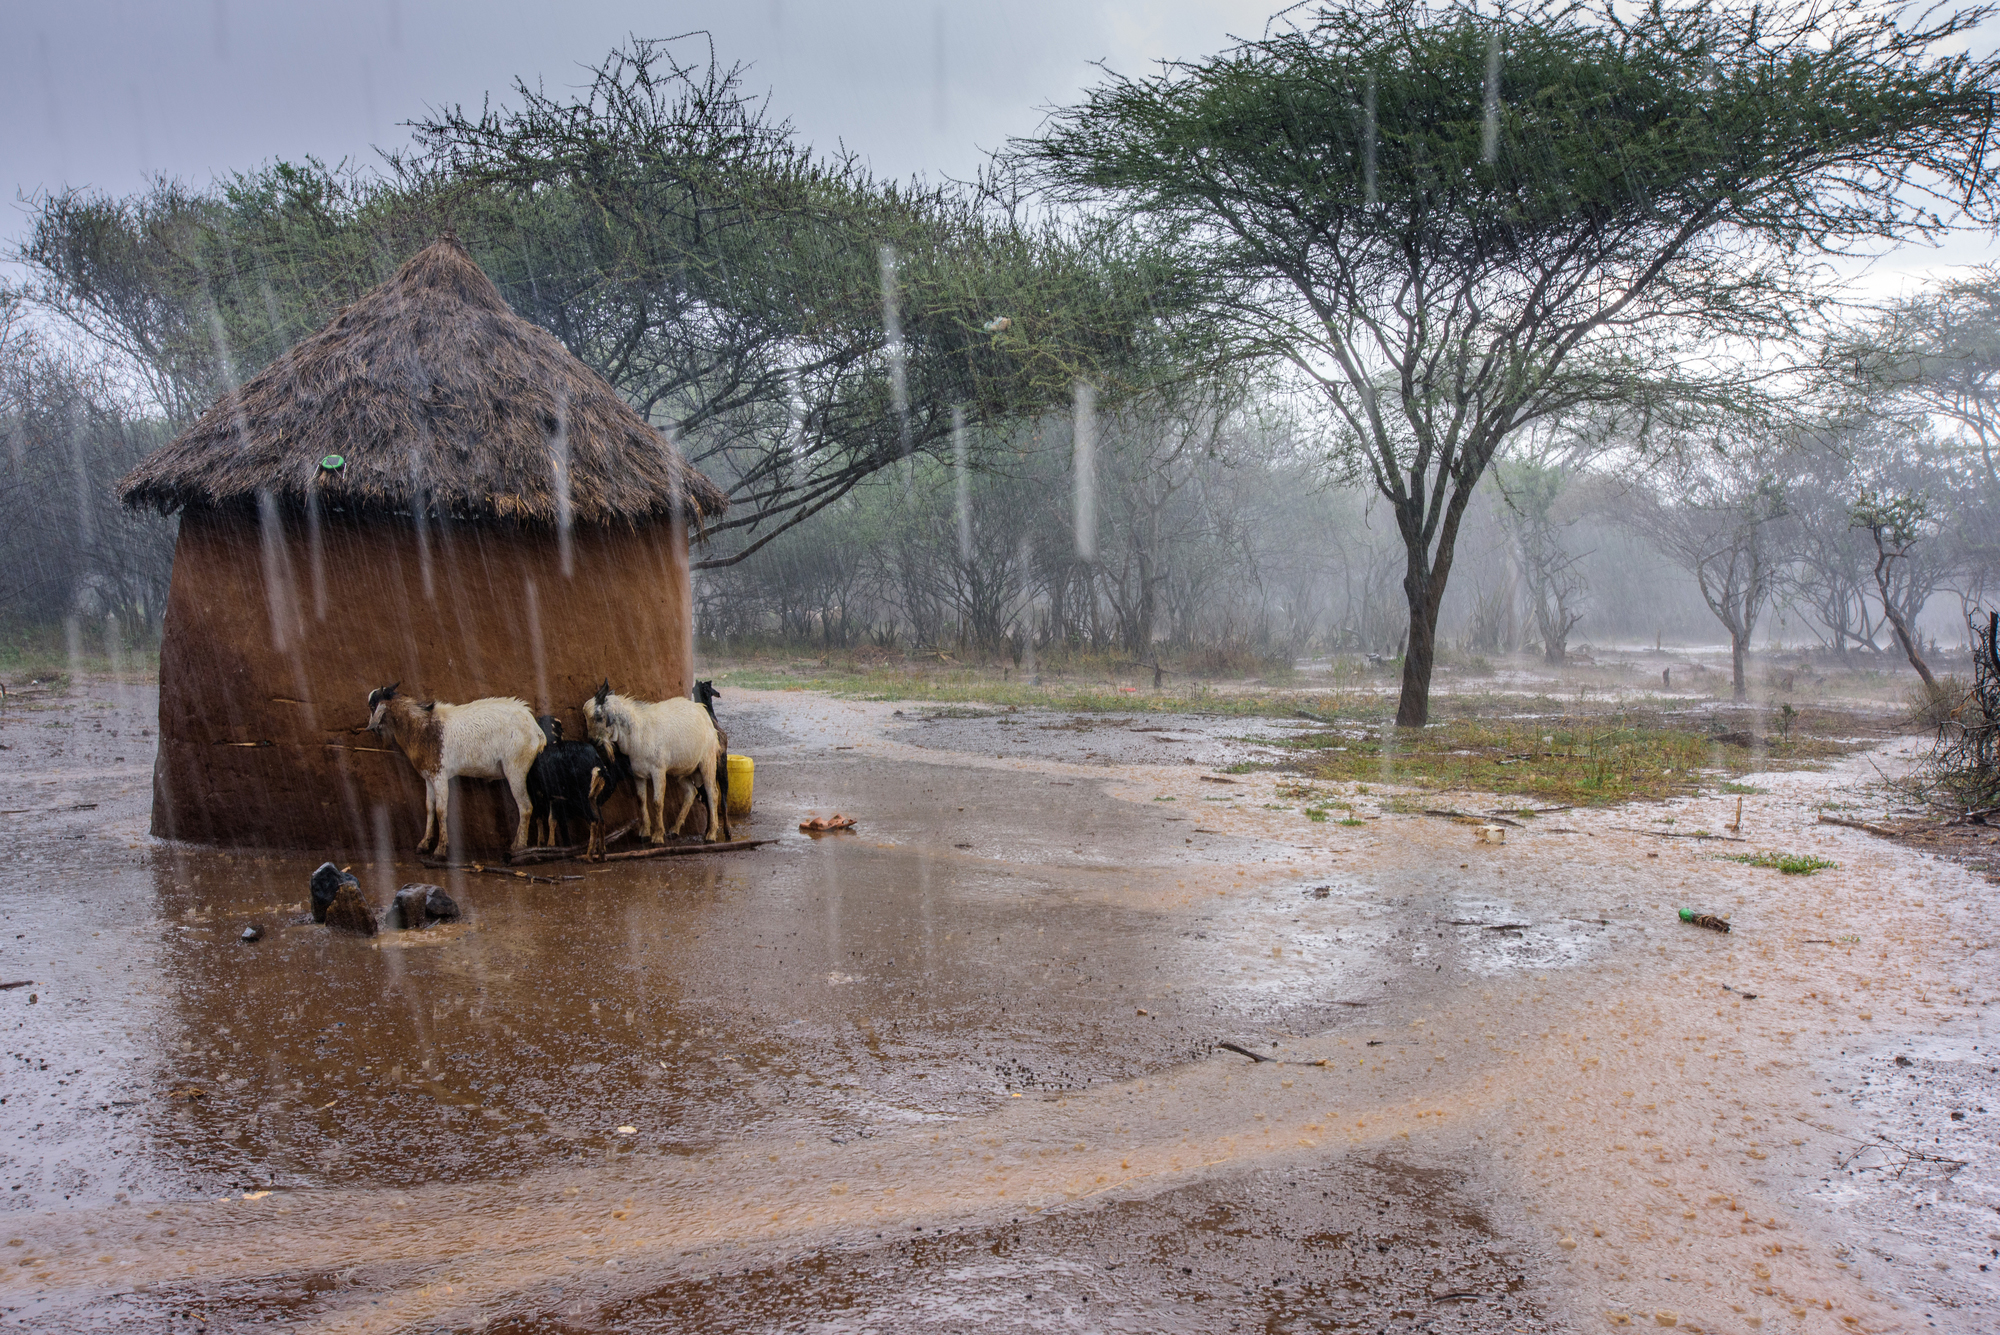 House being flooded by rains in Kenya